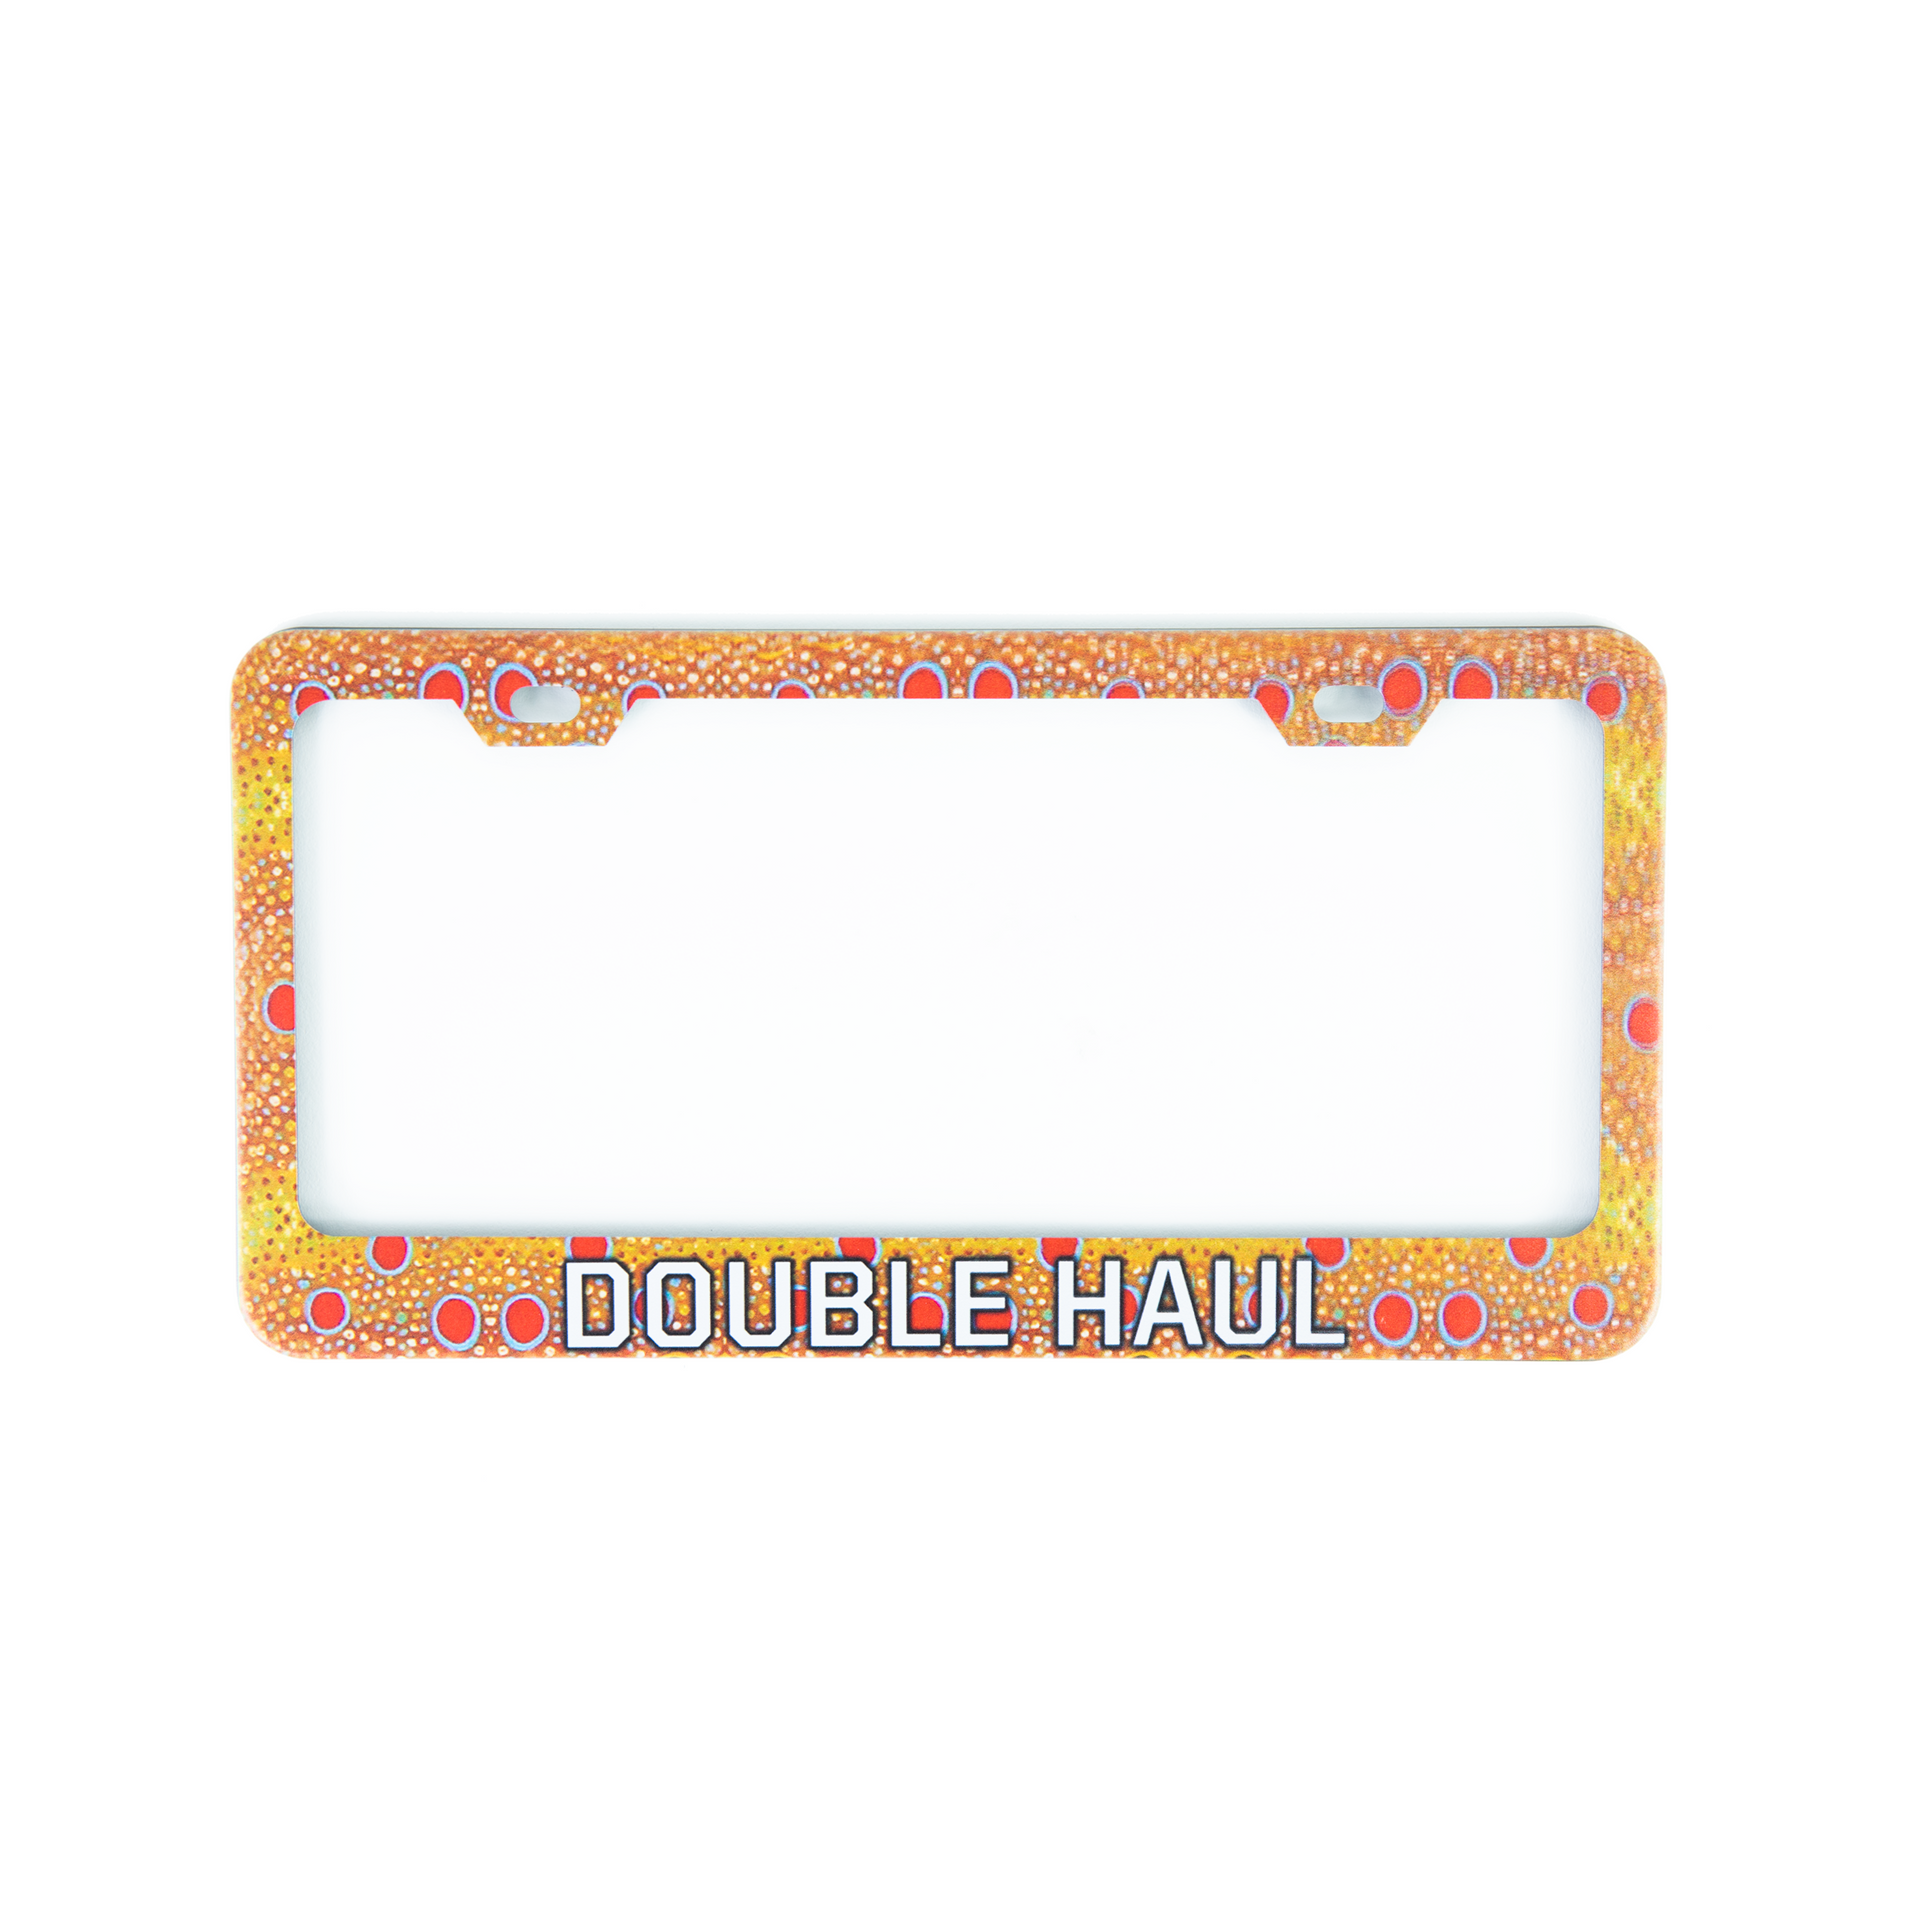 Double Haul License Plate Frame - Brown Trout (6580596604951)